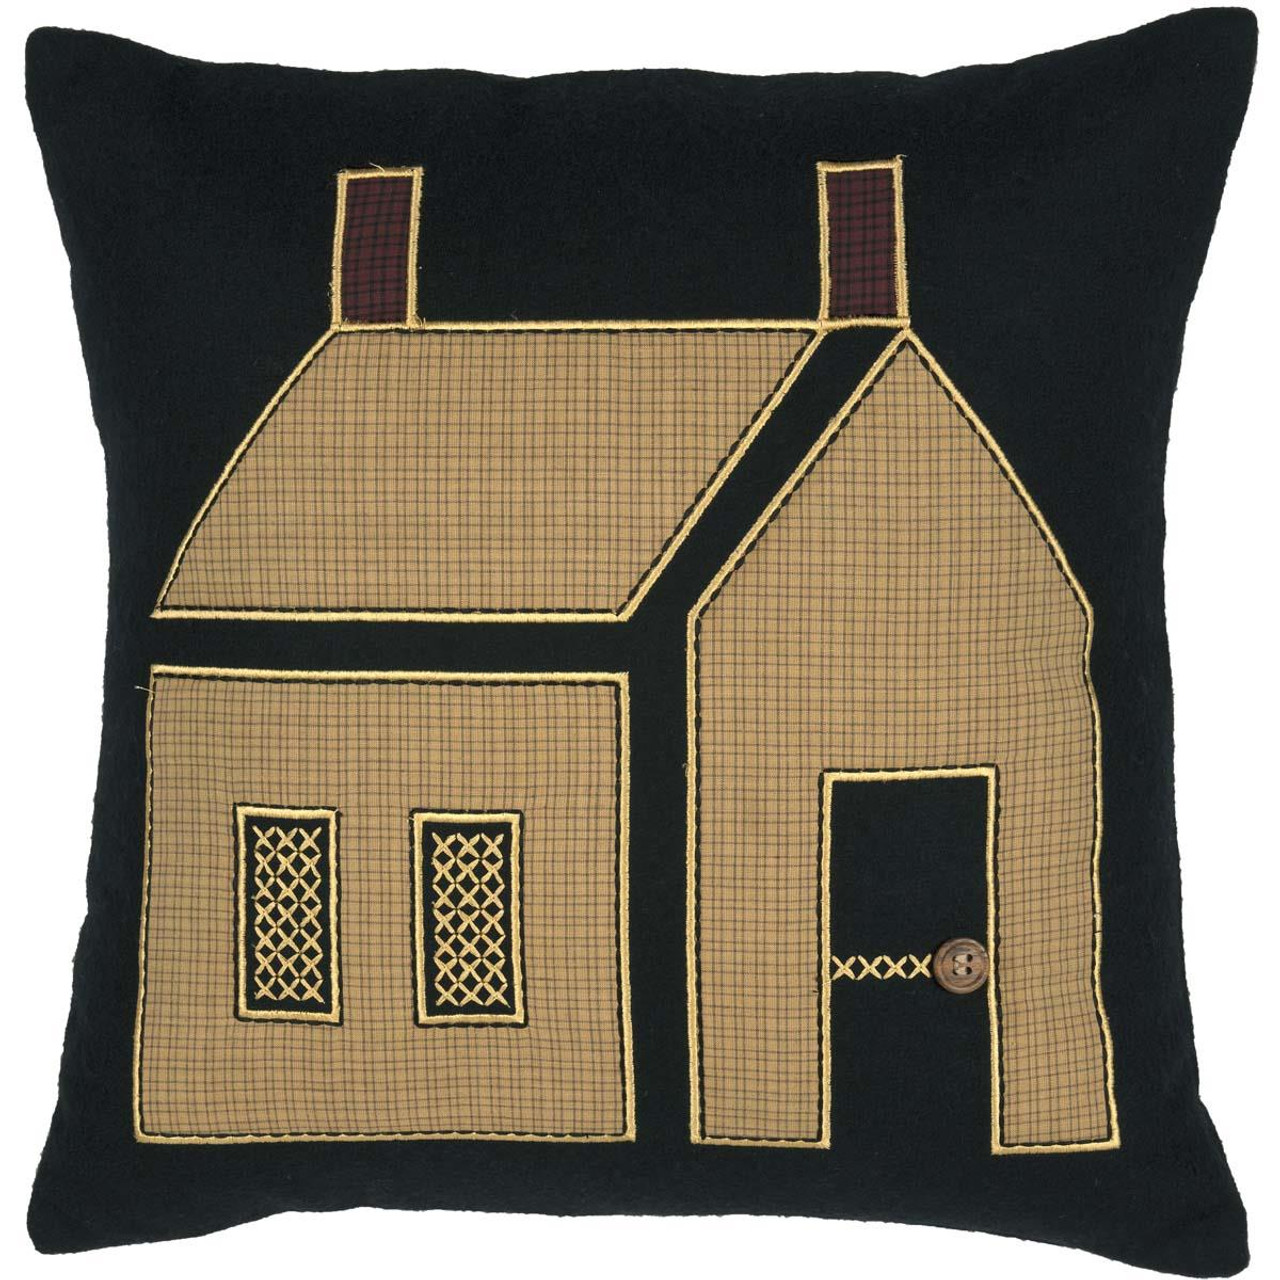 https://cdn11.bigcommerce.com/s-tfdhmk/images/stencil/1280x1280/products/21217/155763/Heritage-Farms-Primitive-House-Pillow-18x18-840528159848_image1__20541.1667561133.jpg?c=2